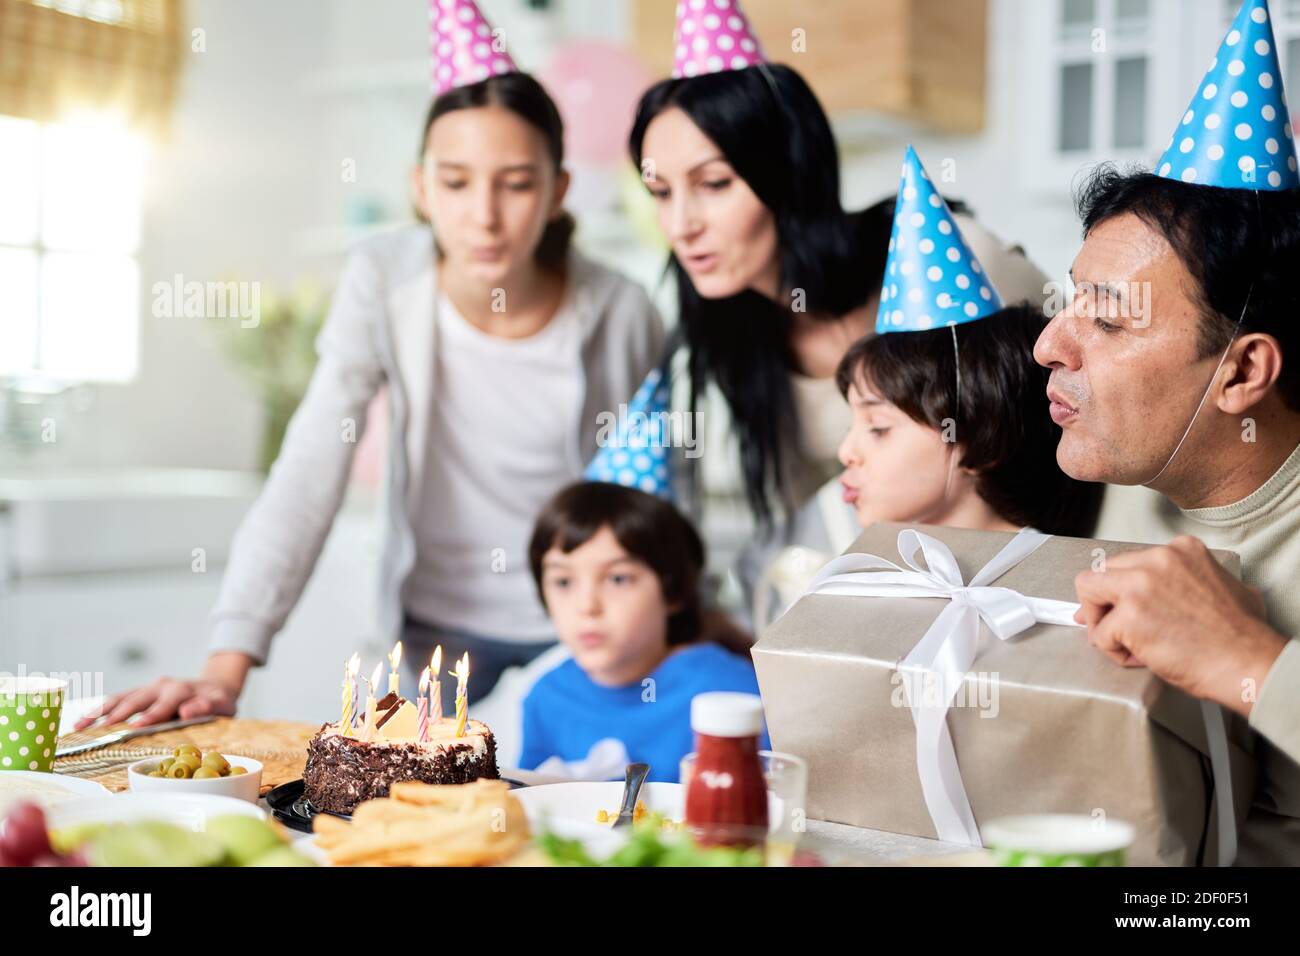 Close latin family with children wearing birthday caps, blowing candles on a cake while celebrating birthday together at home. Selective focus Stock Photo